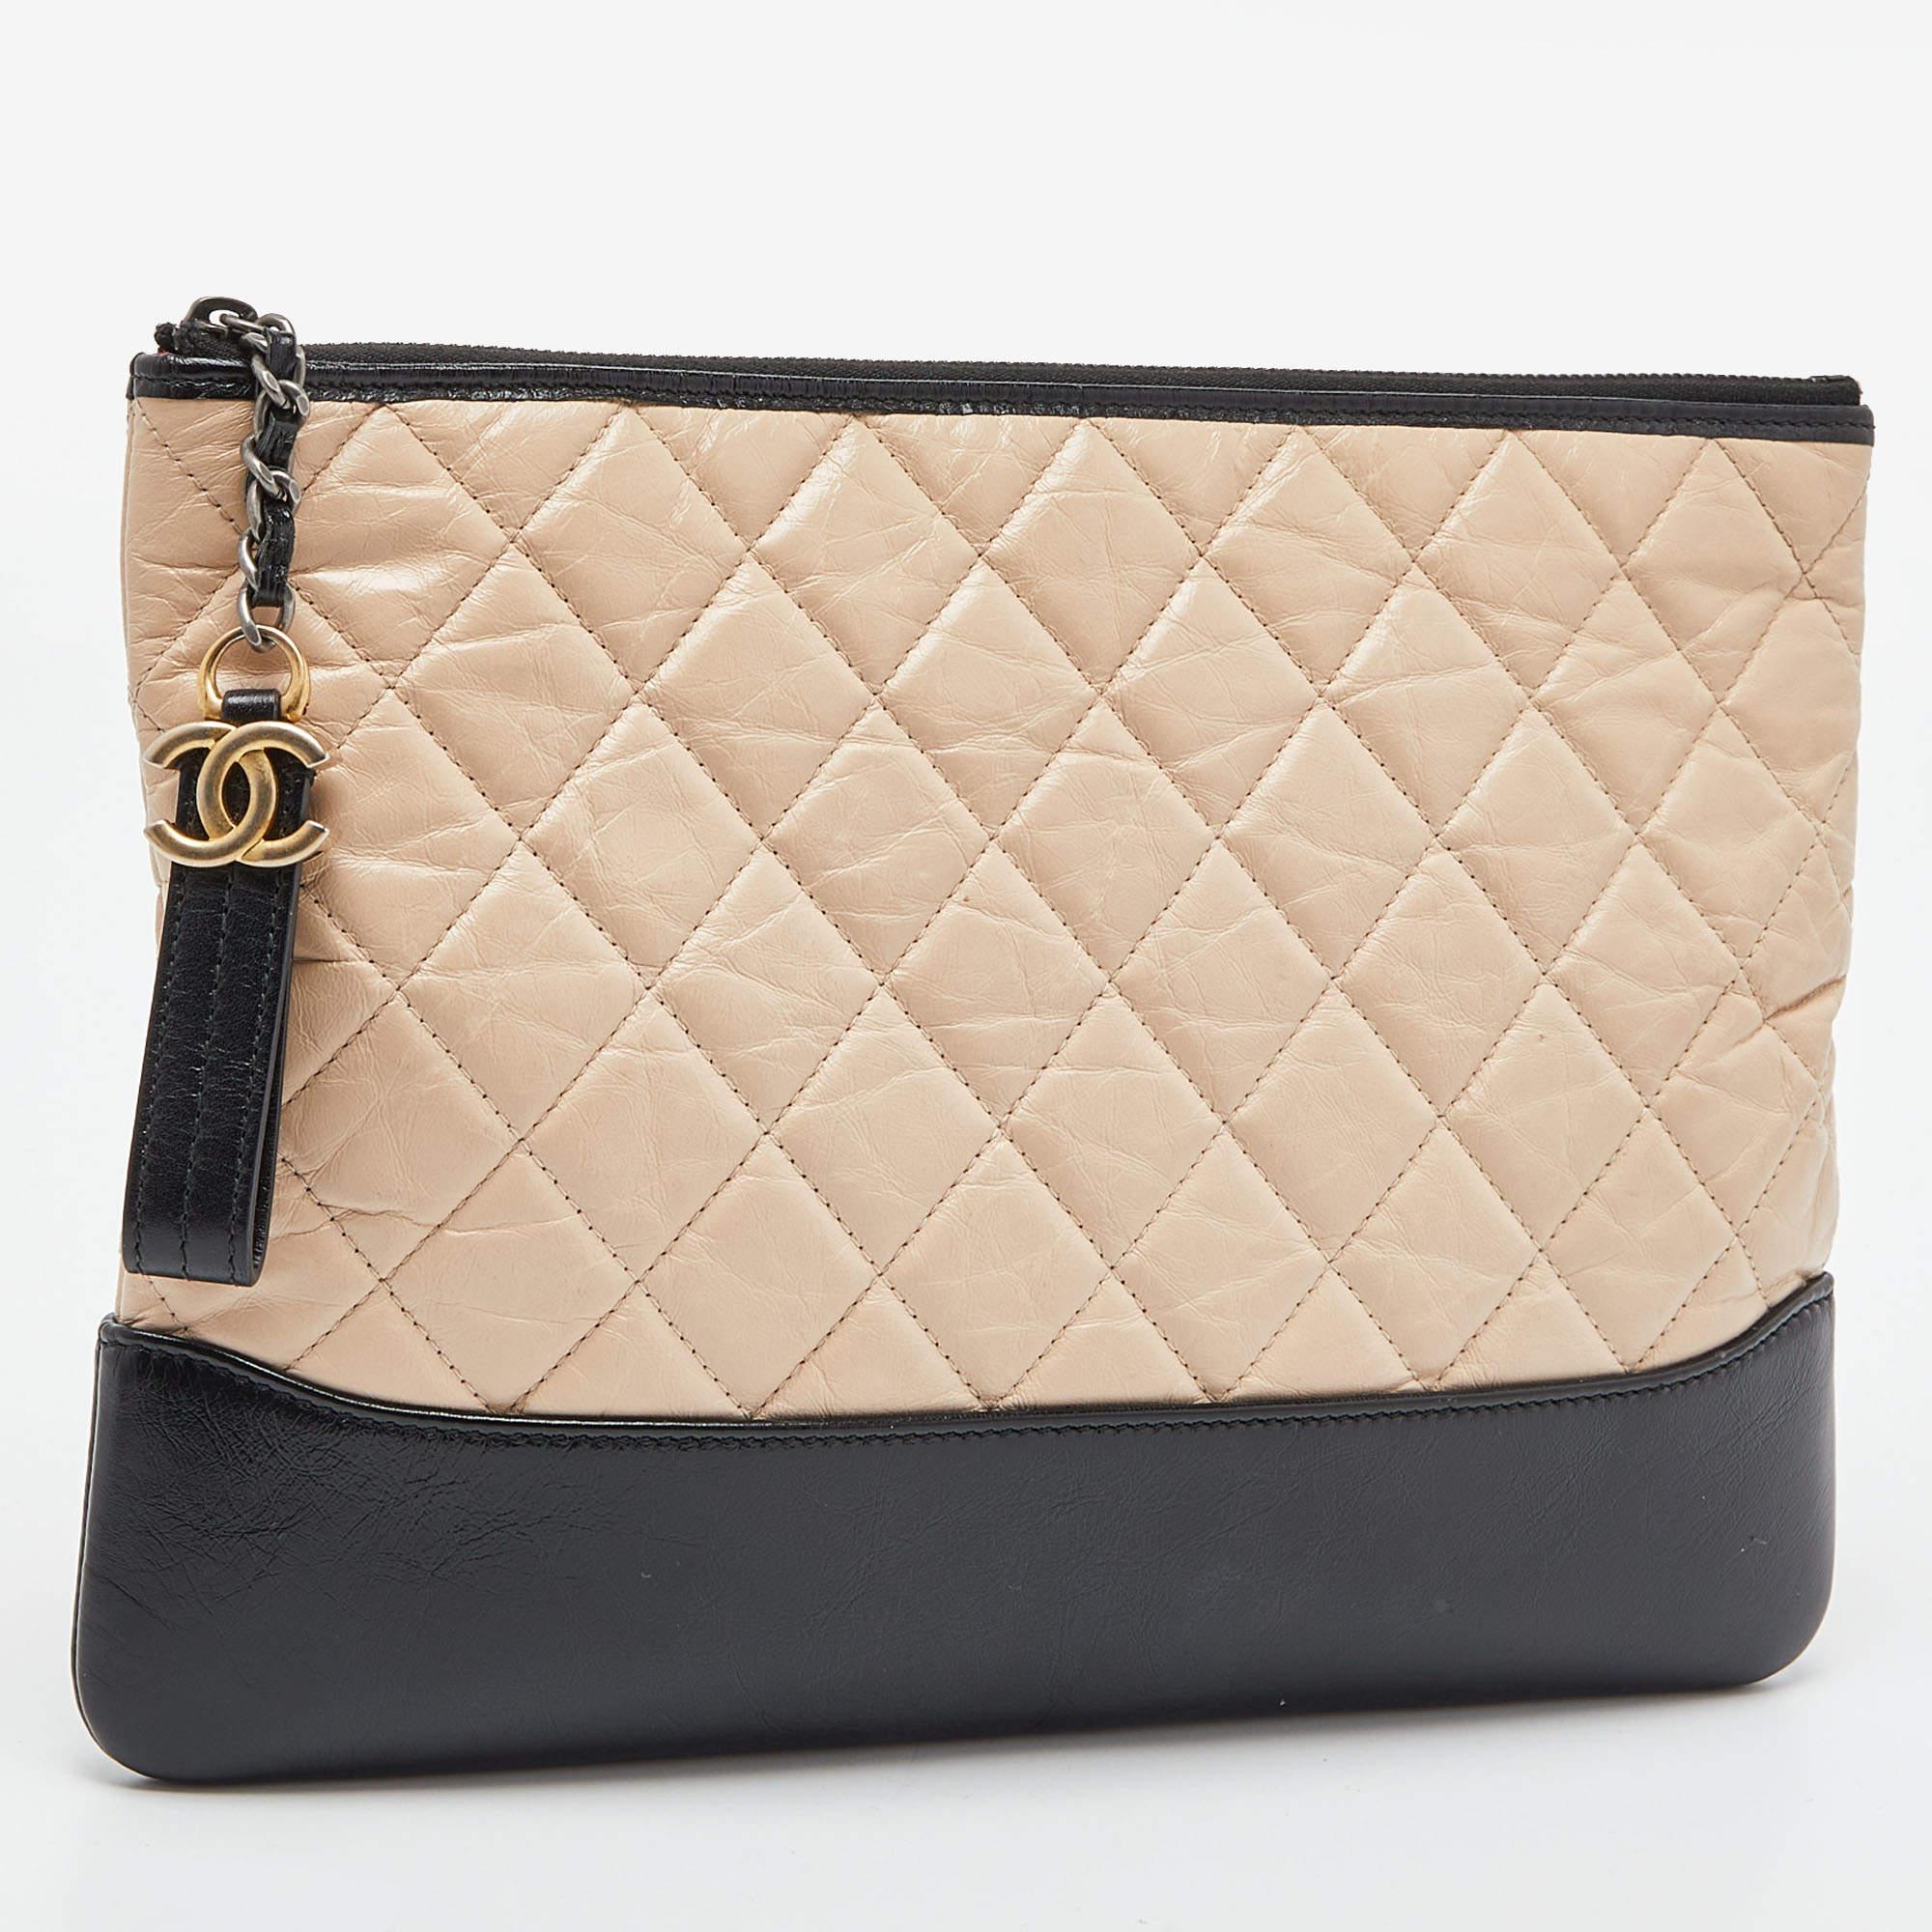 Women's Chanel Beige/Black Quilted Leather Gabrielle Clutch